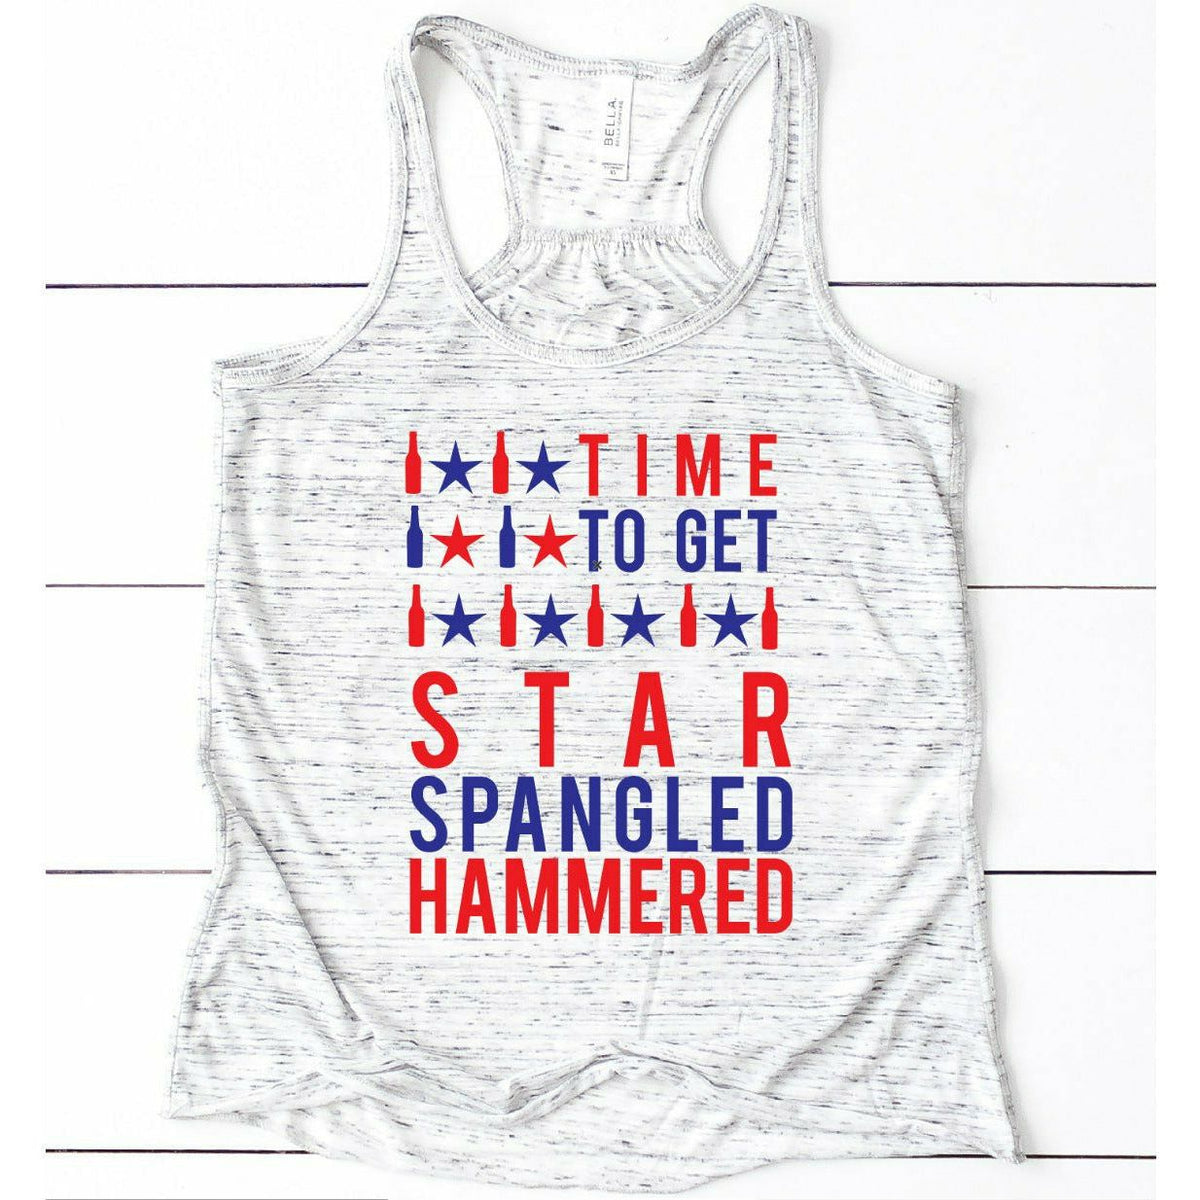 Star spangled hammered tee or tank